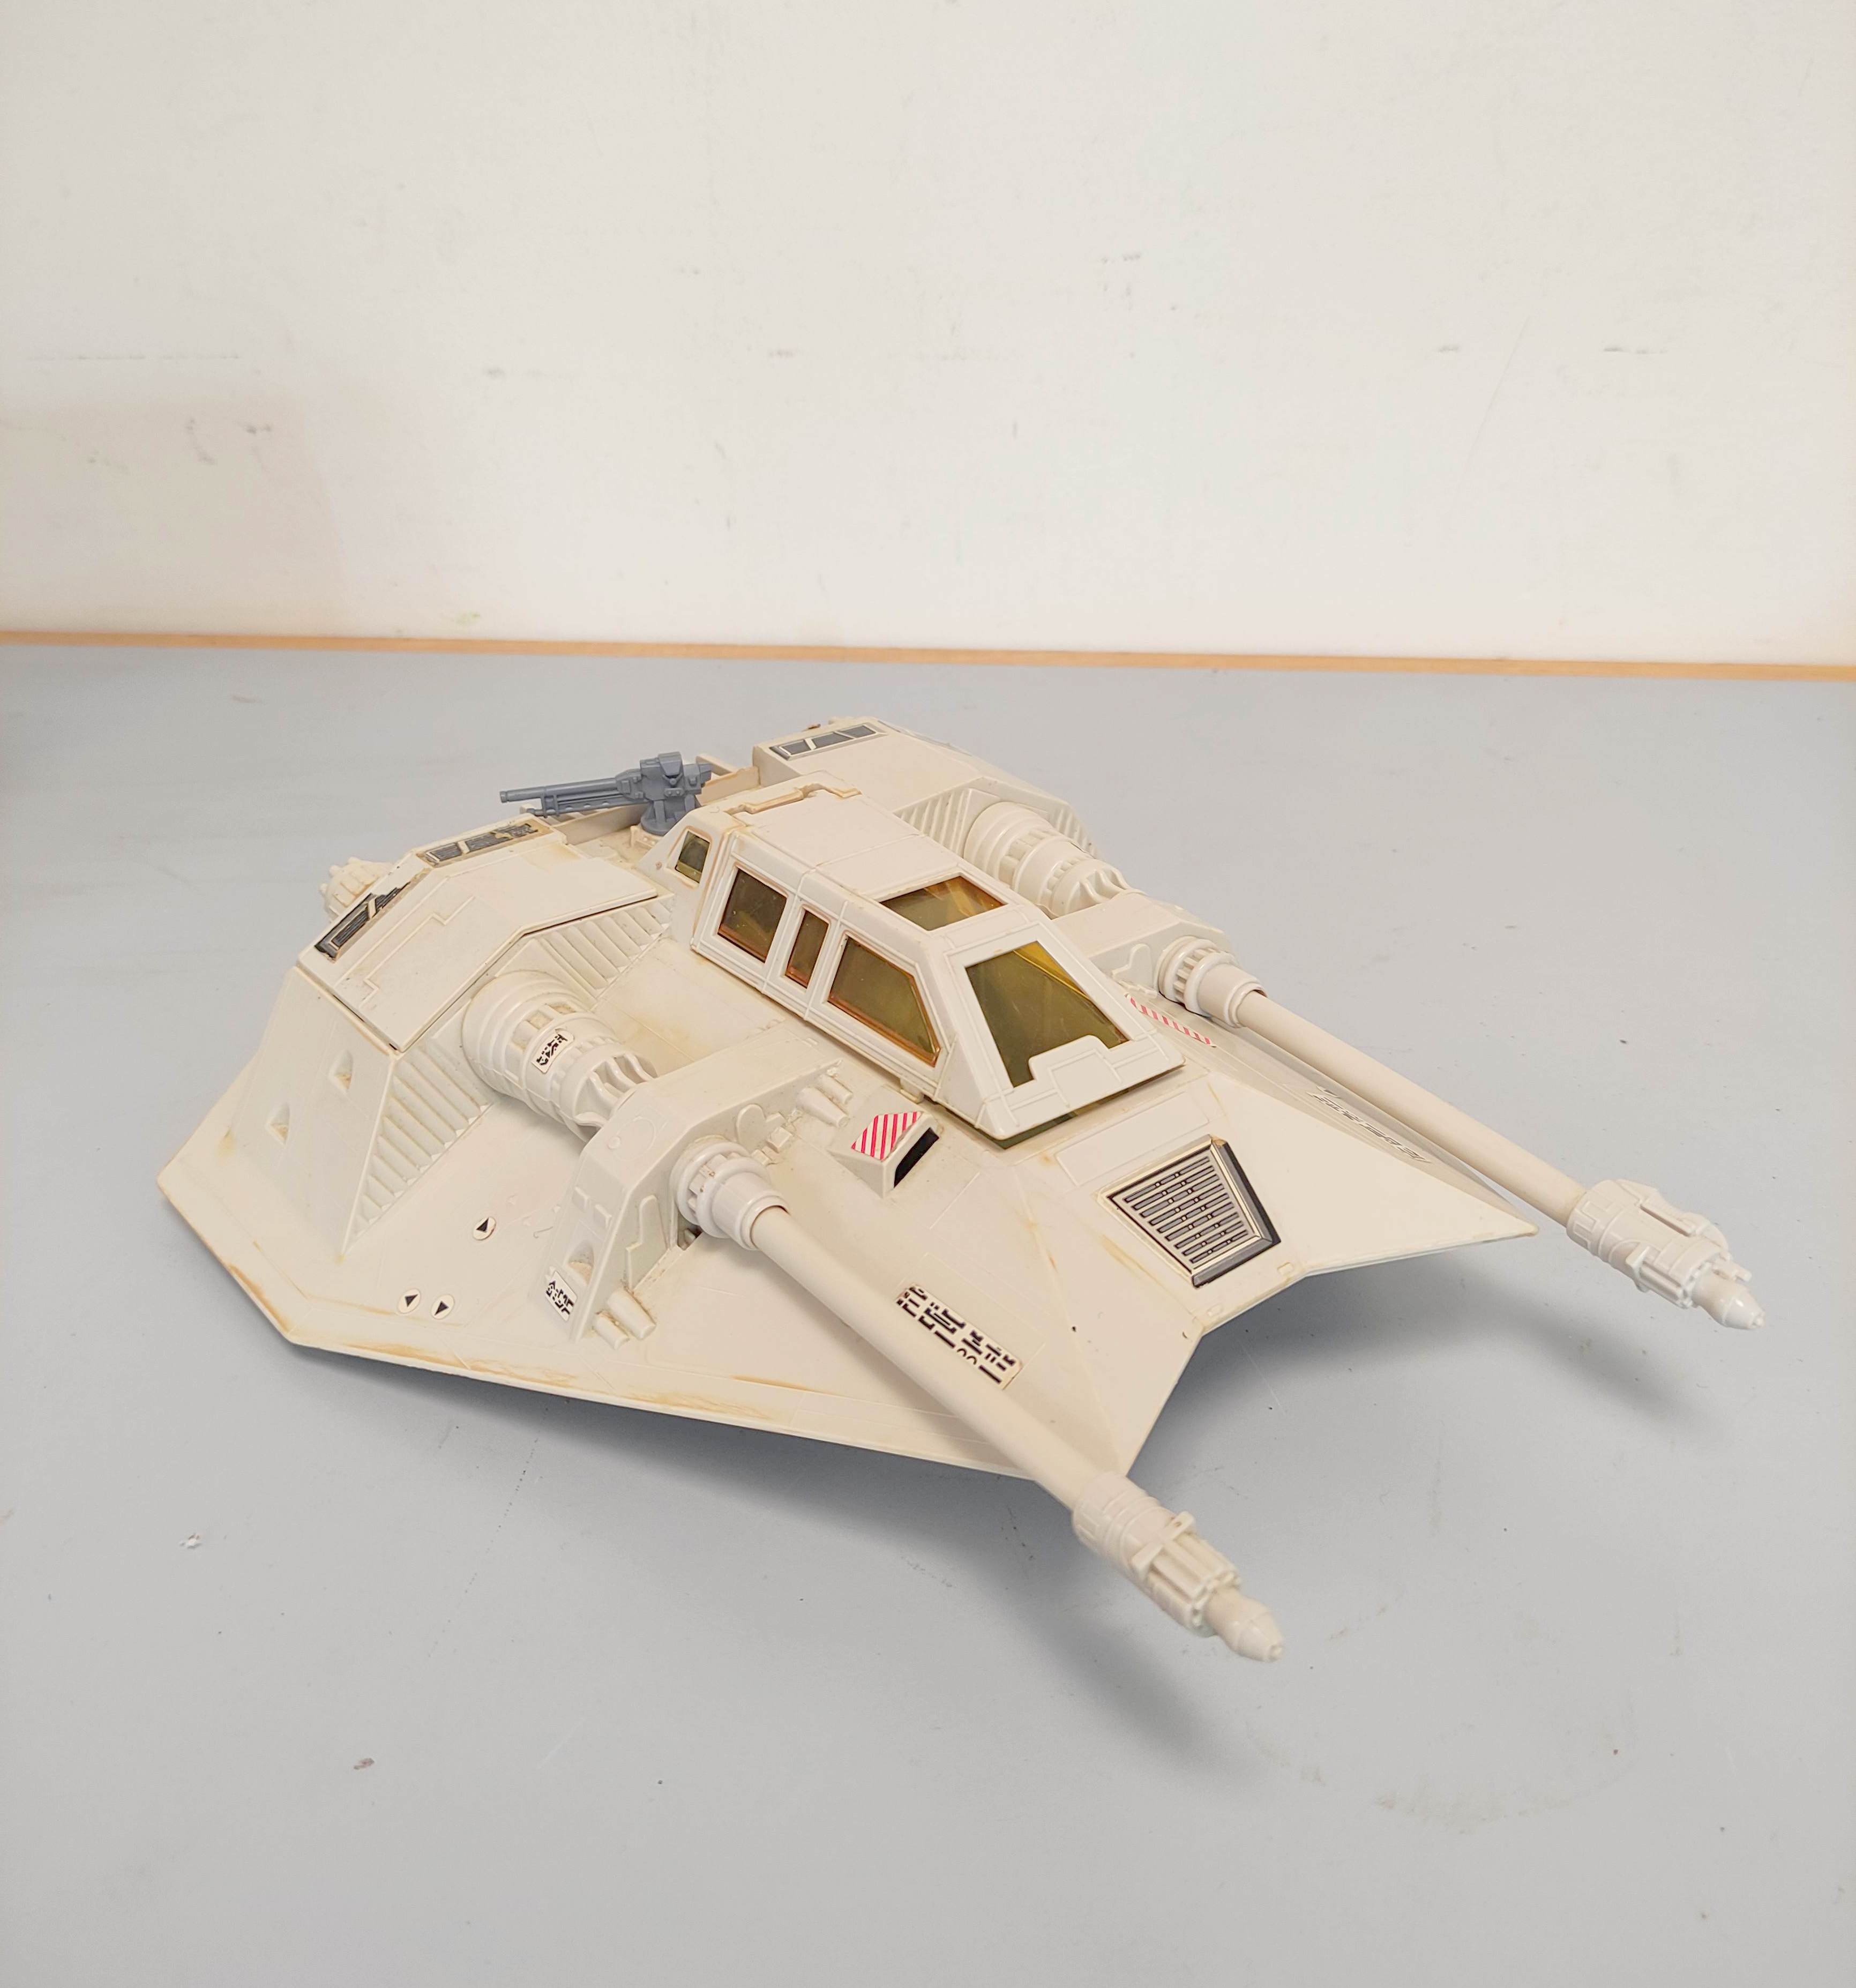 Star Wars- 1983 Return Of The Jedi Rebel Armoured Snowspeeder Vehicle by Kenner Toys with - Image 4 of 7